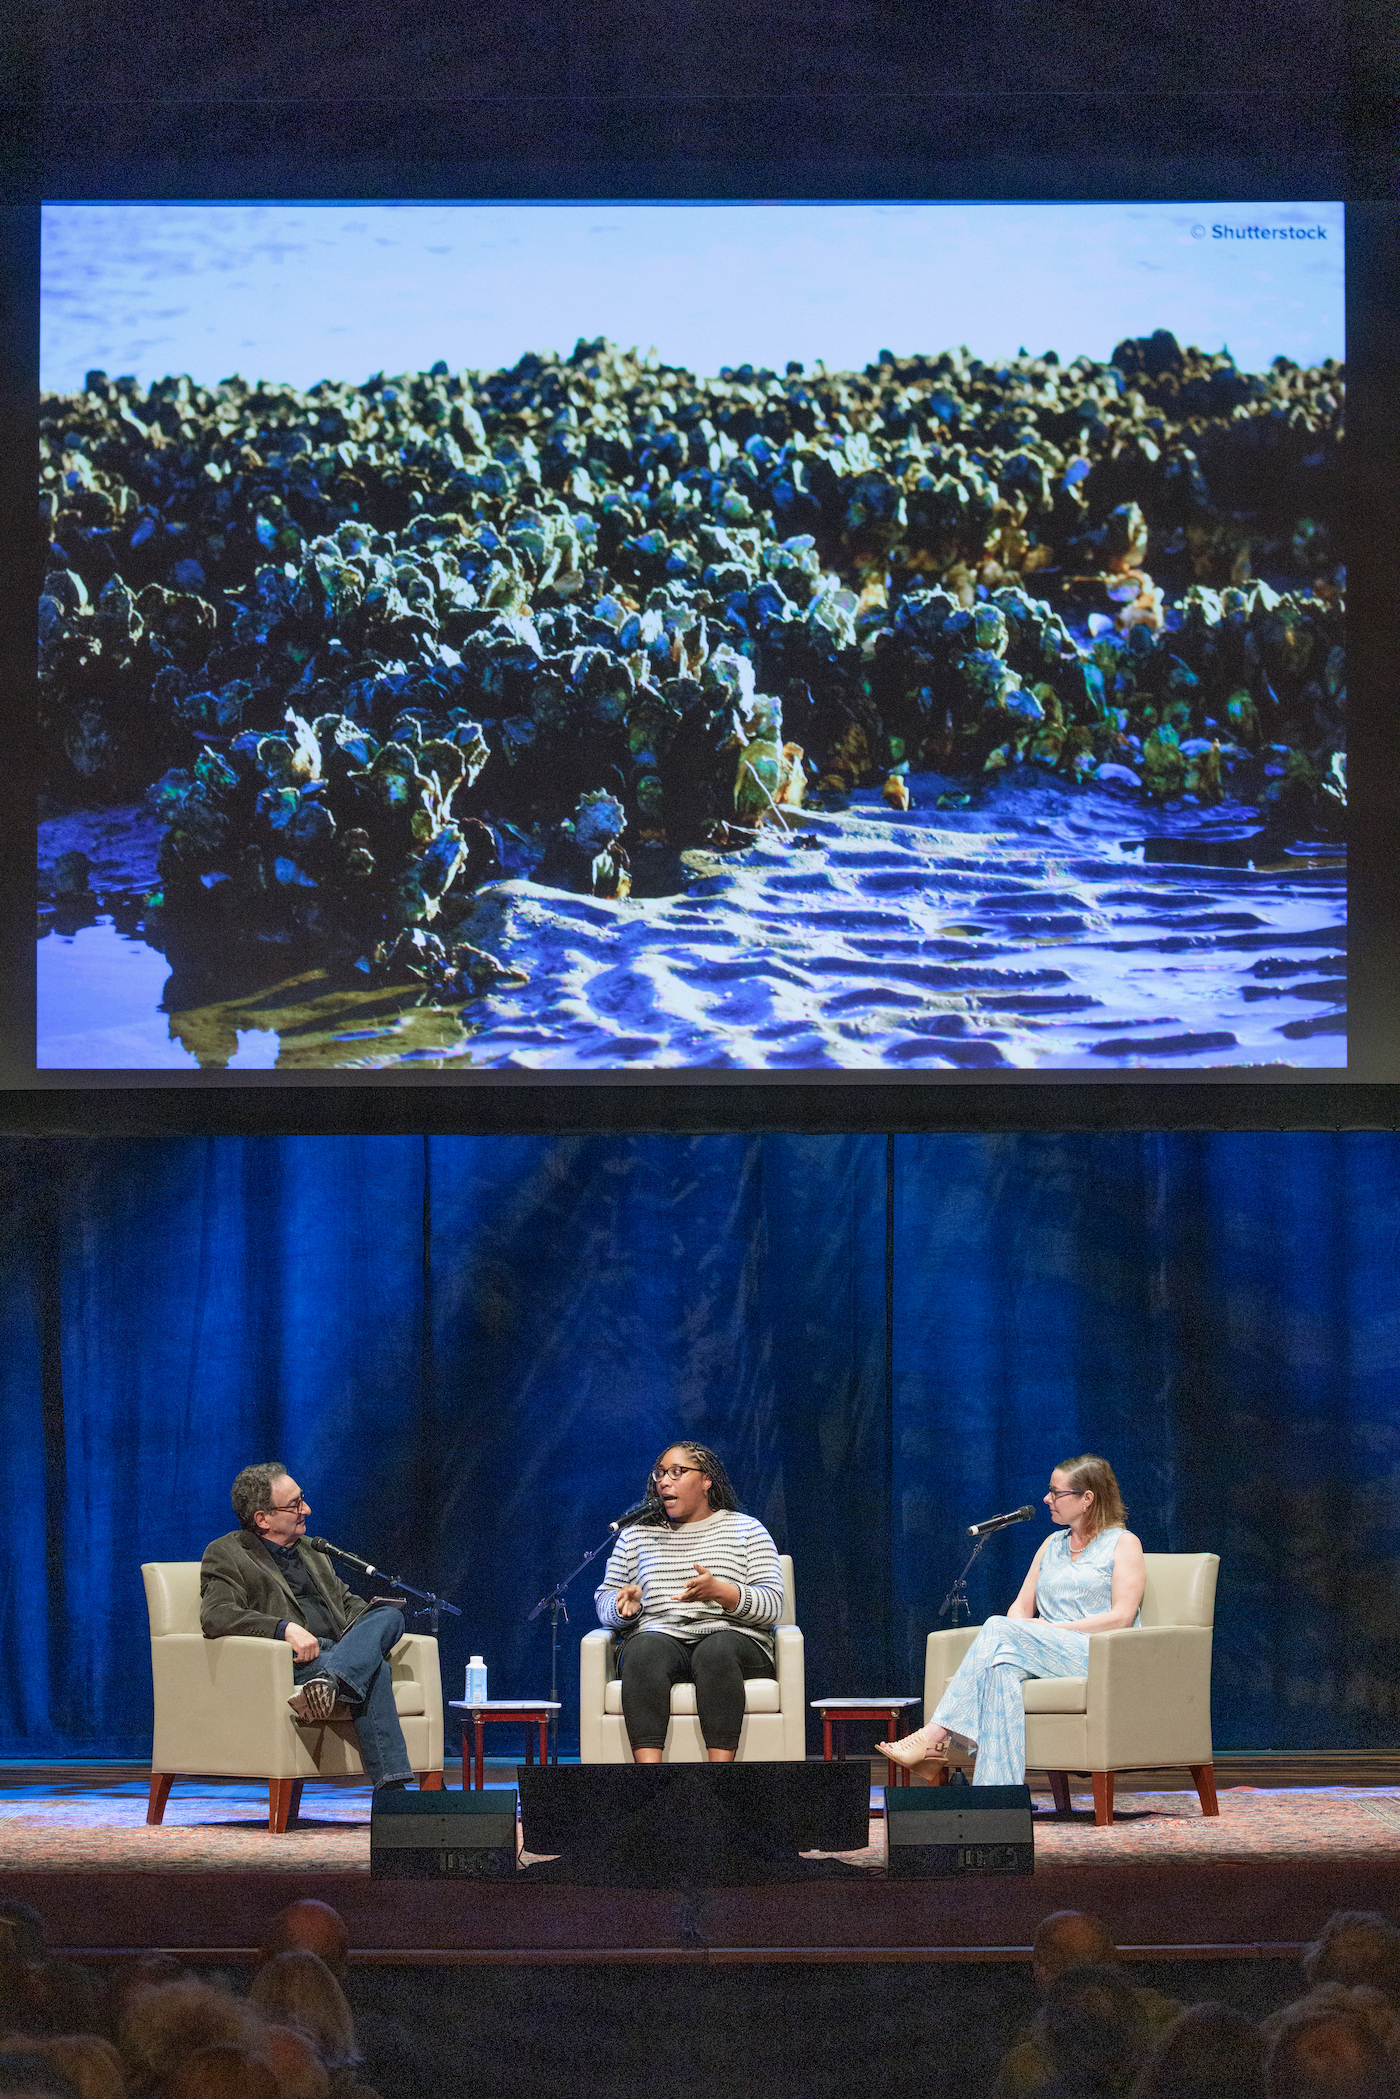 Three people sitting in chairs on a stage with an image of oysters in water projected above them.